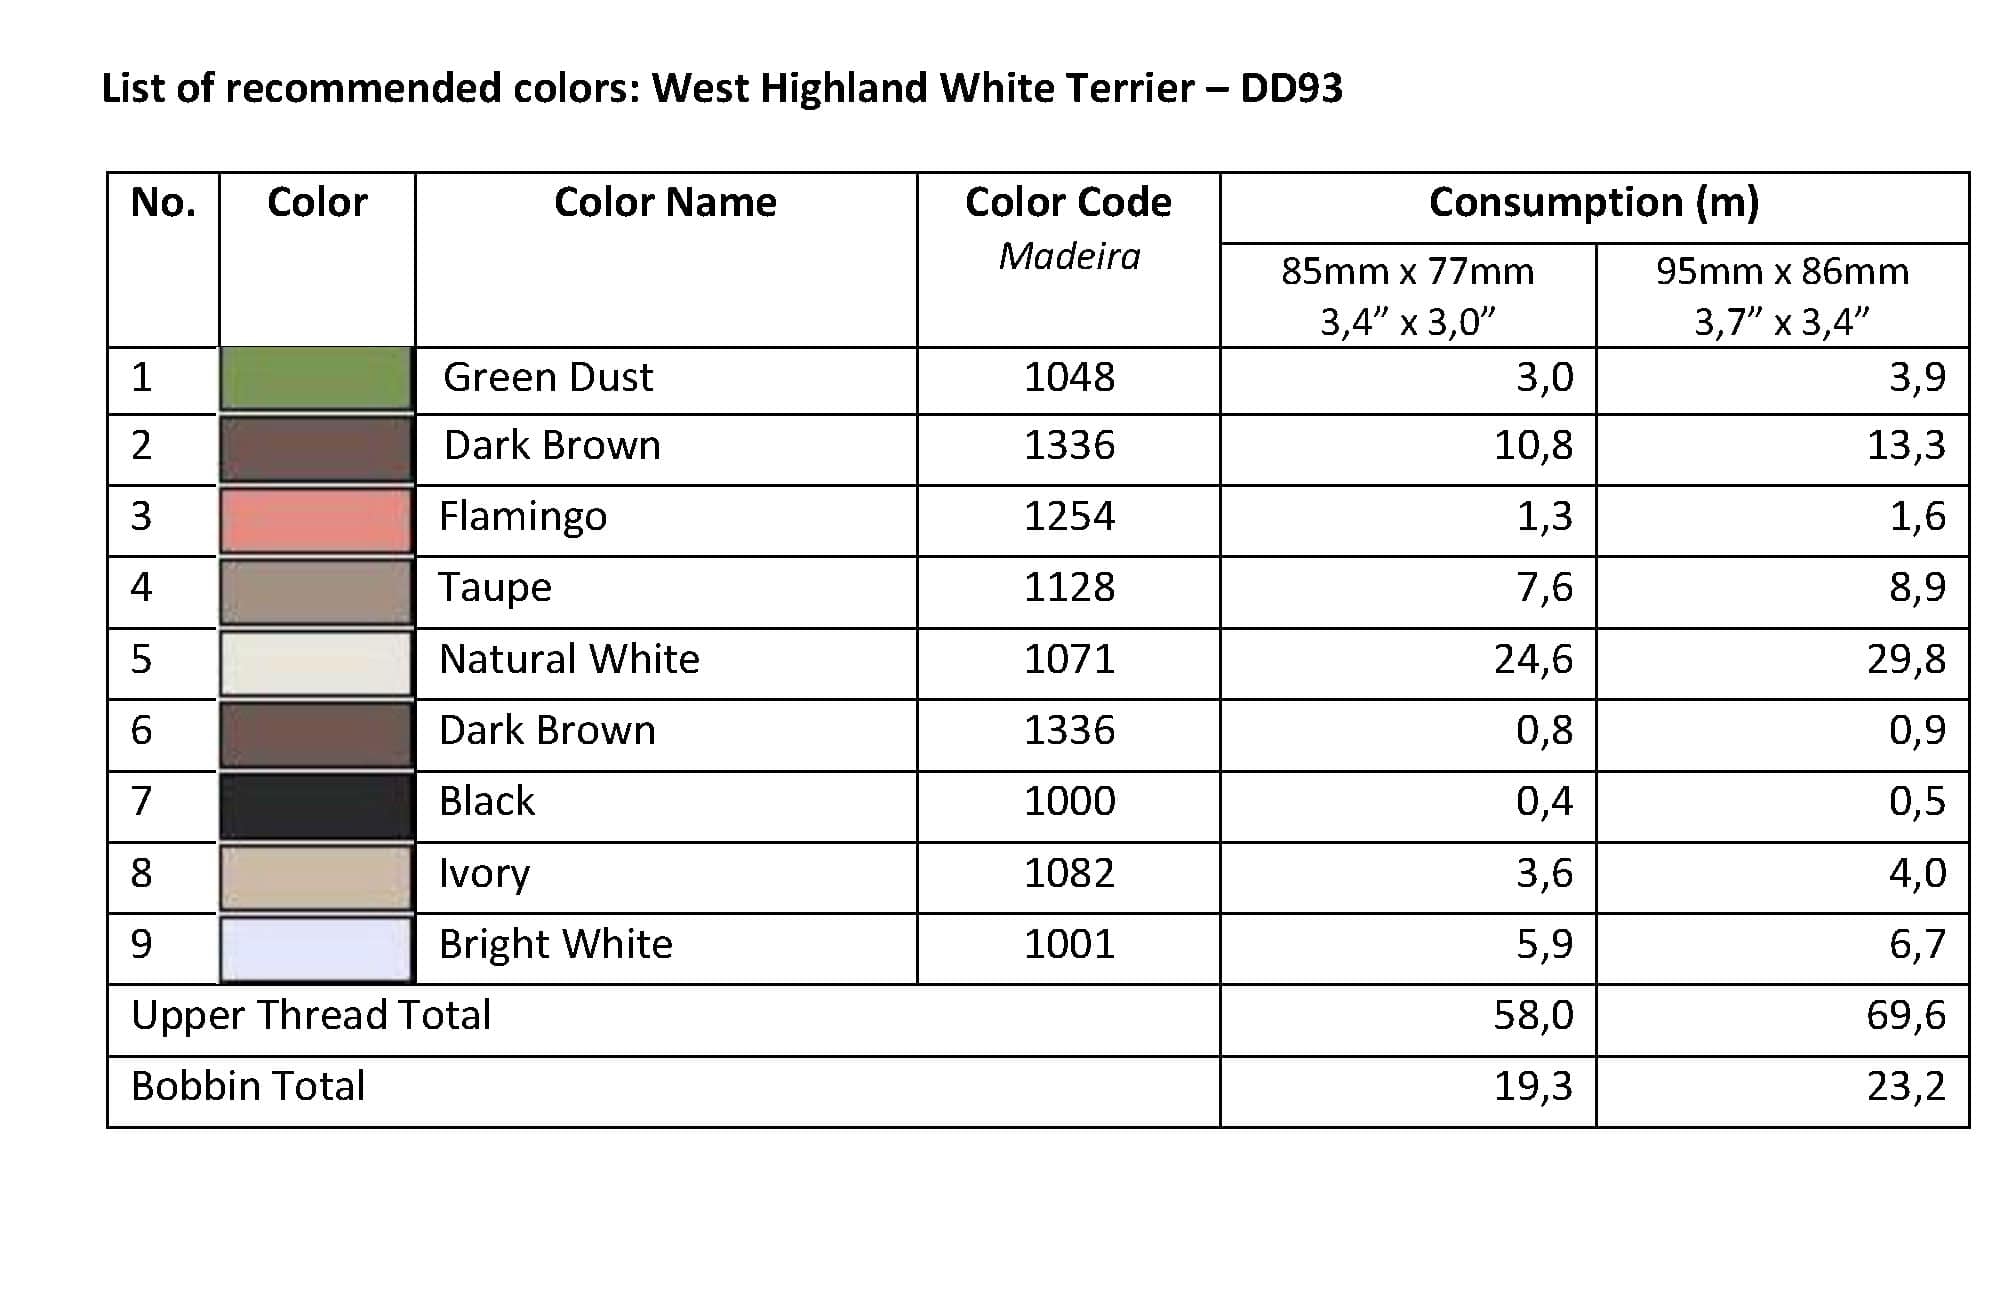 List of Recommended Colors -  West Highland White Terrier DD93